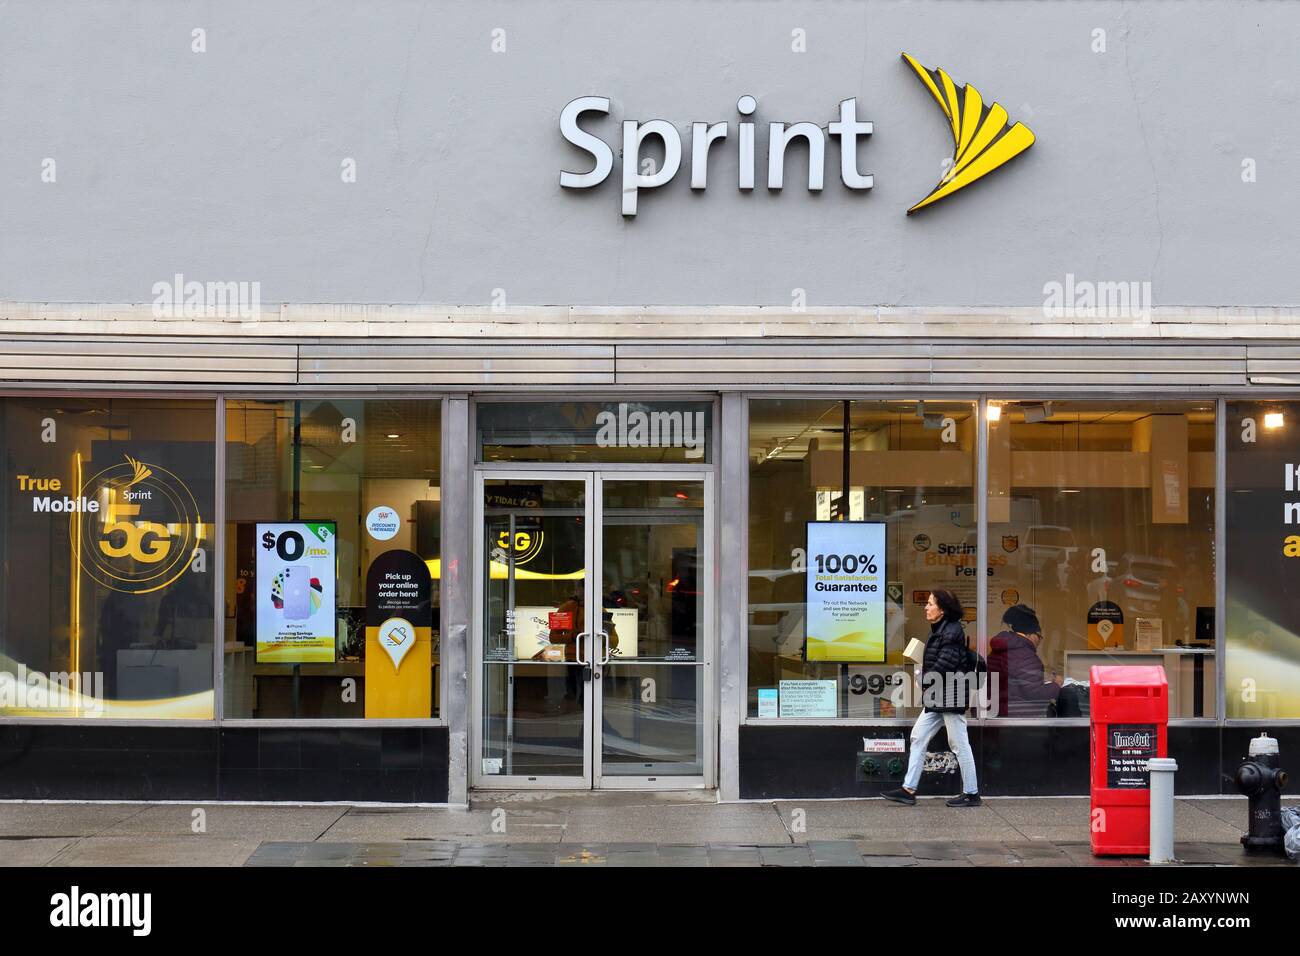 [historical storefront] Sprint, 403 6th Ave, New York. NYC storefront photo of a cellphone store and wireless provider. Stock Photo